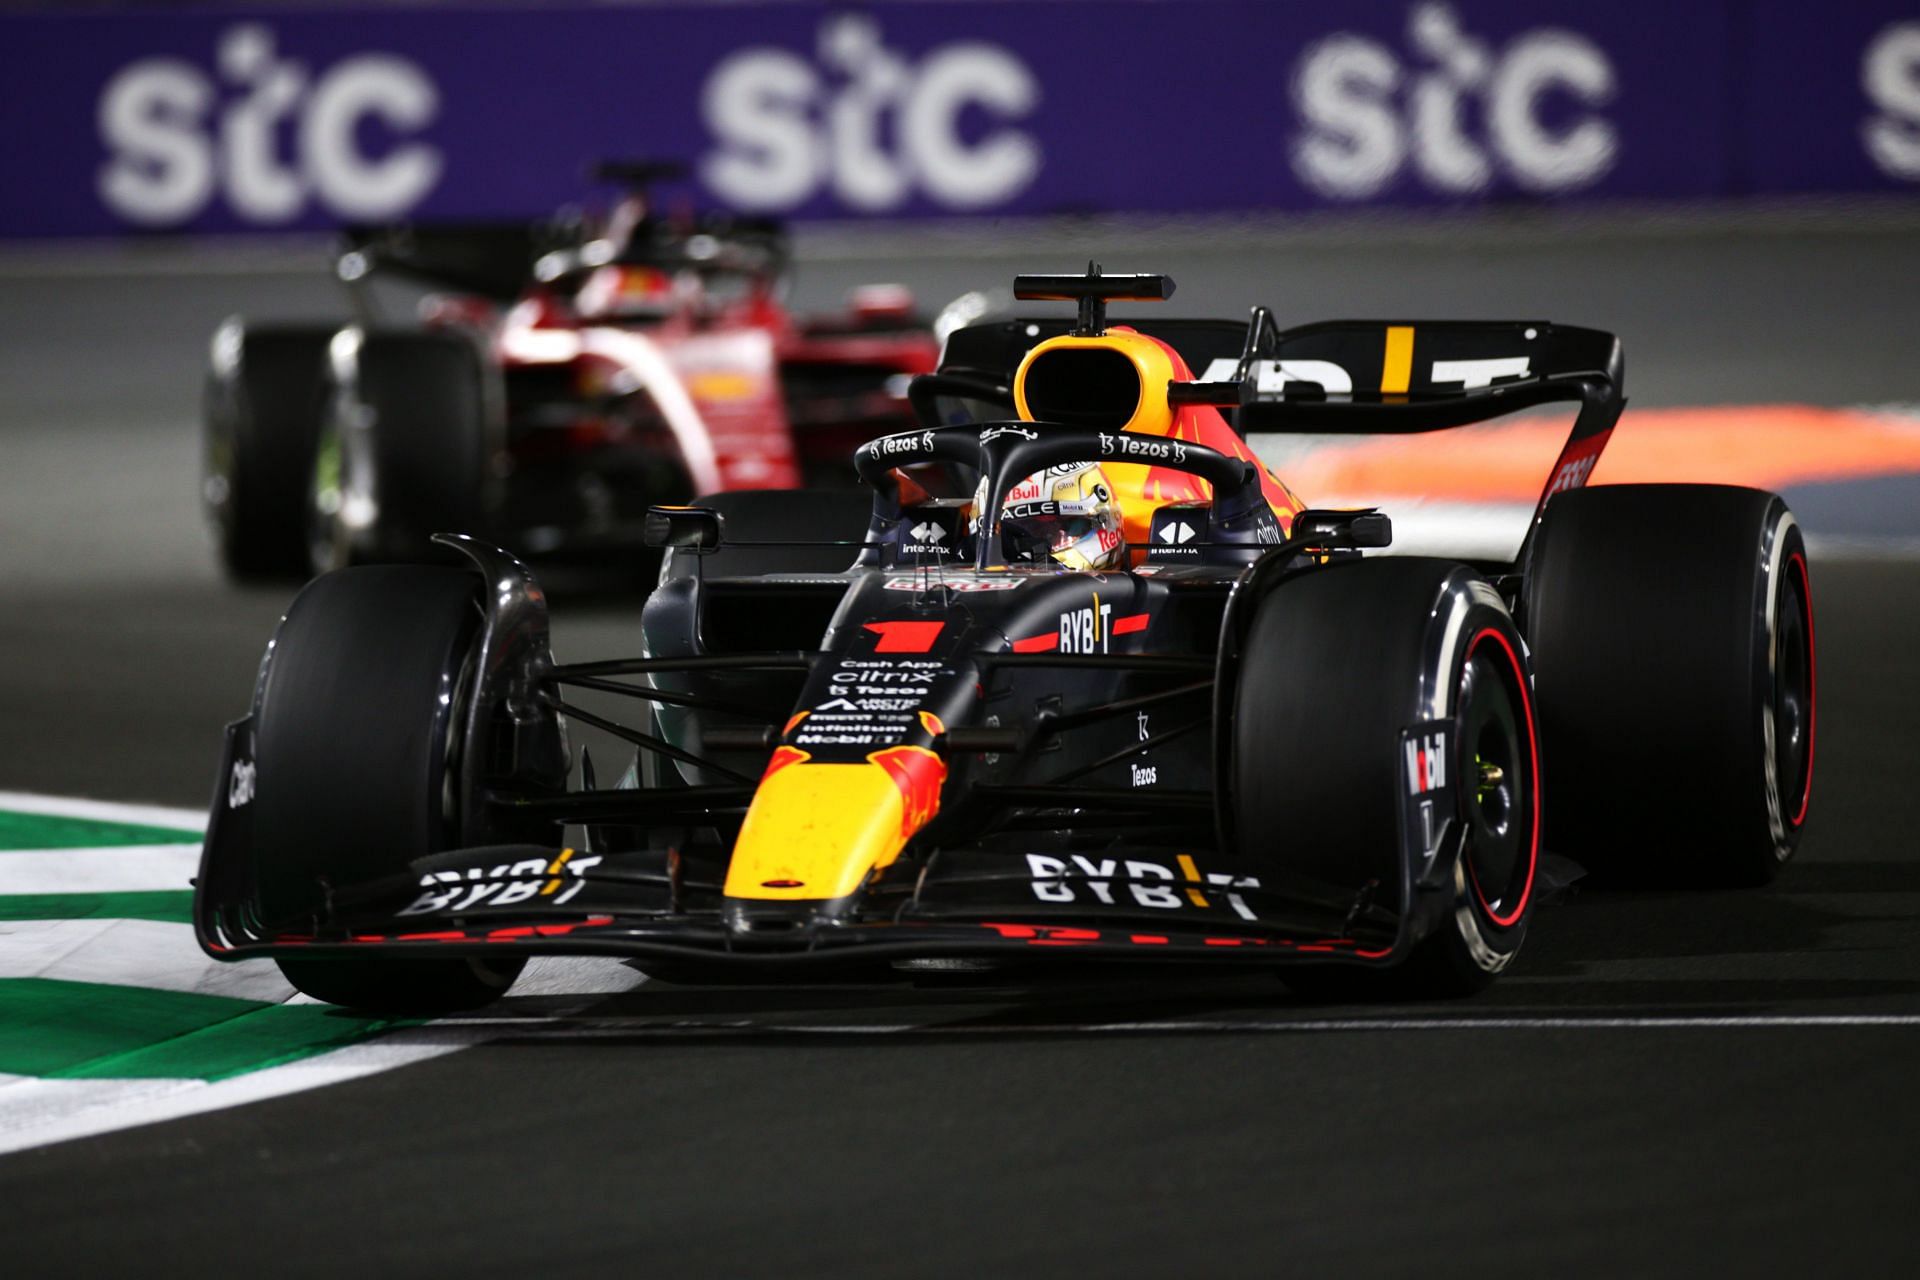 Max Verstappen (foreground) in action against Charles Leclerc (background) during the 2022 F1 Saudi Arabian GP (Photo by Peter Fox/Getty Images)